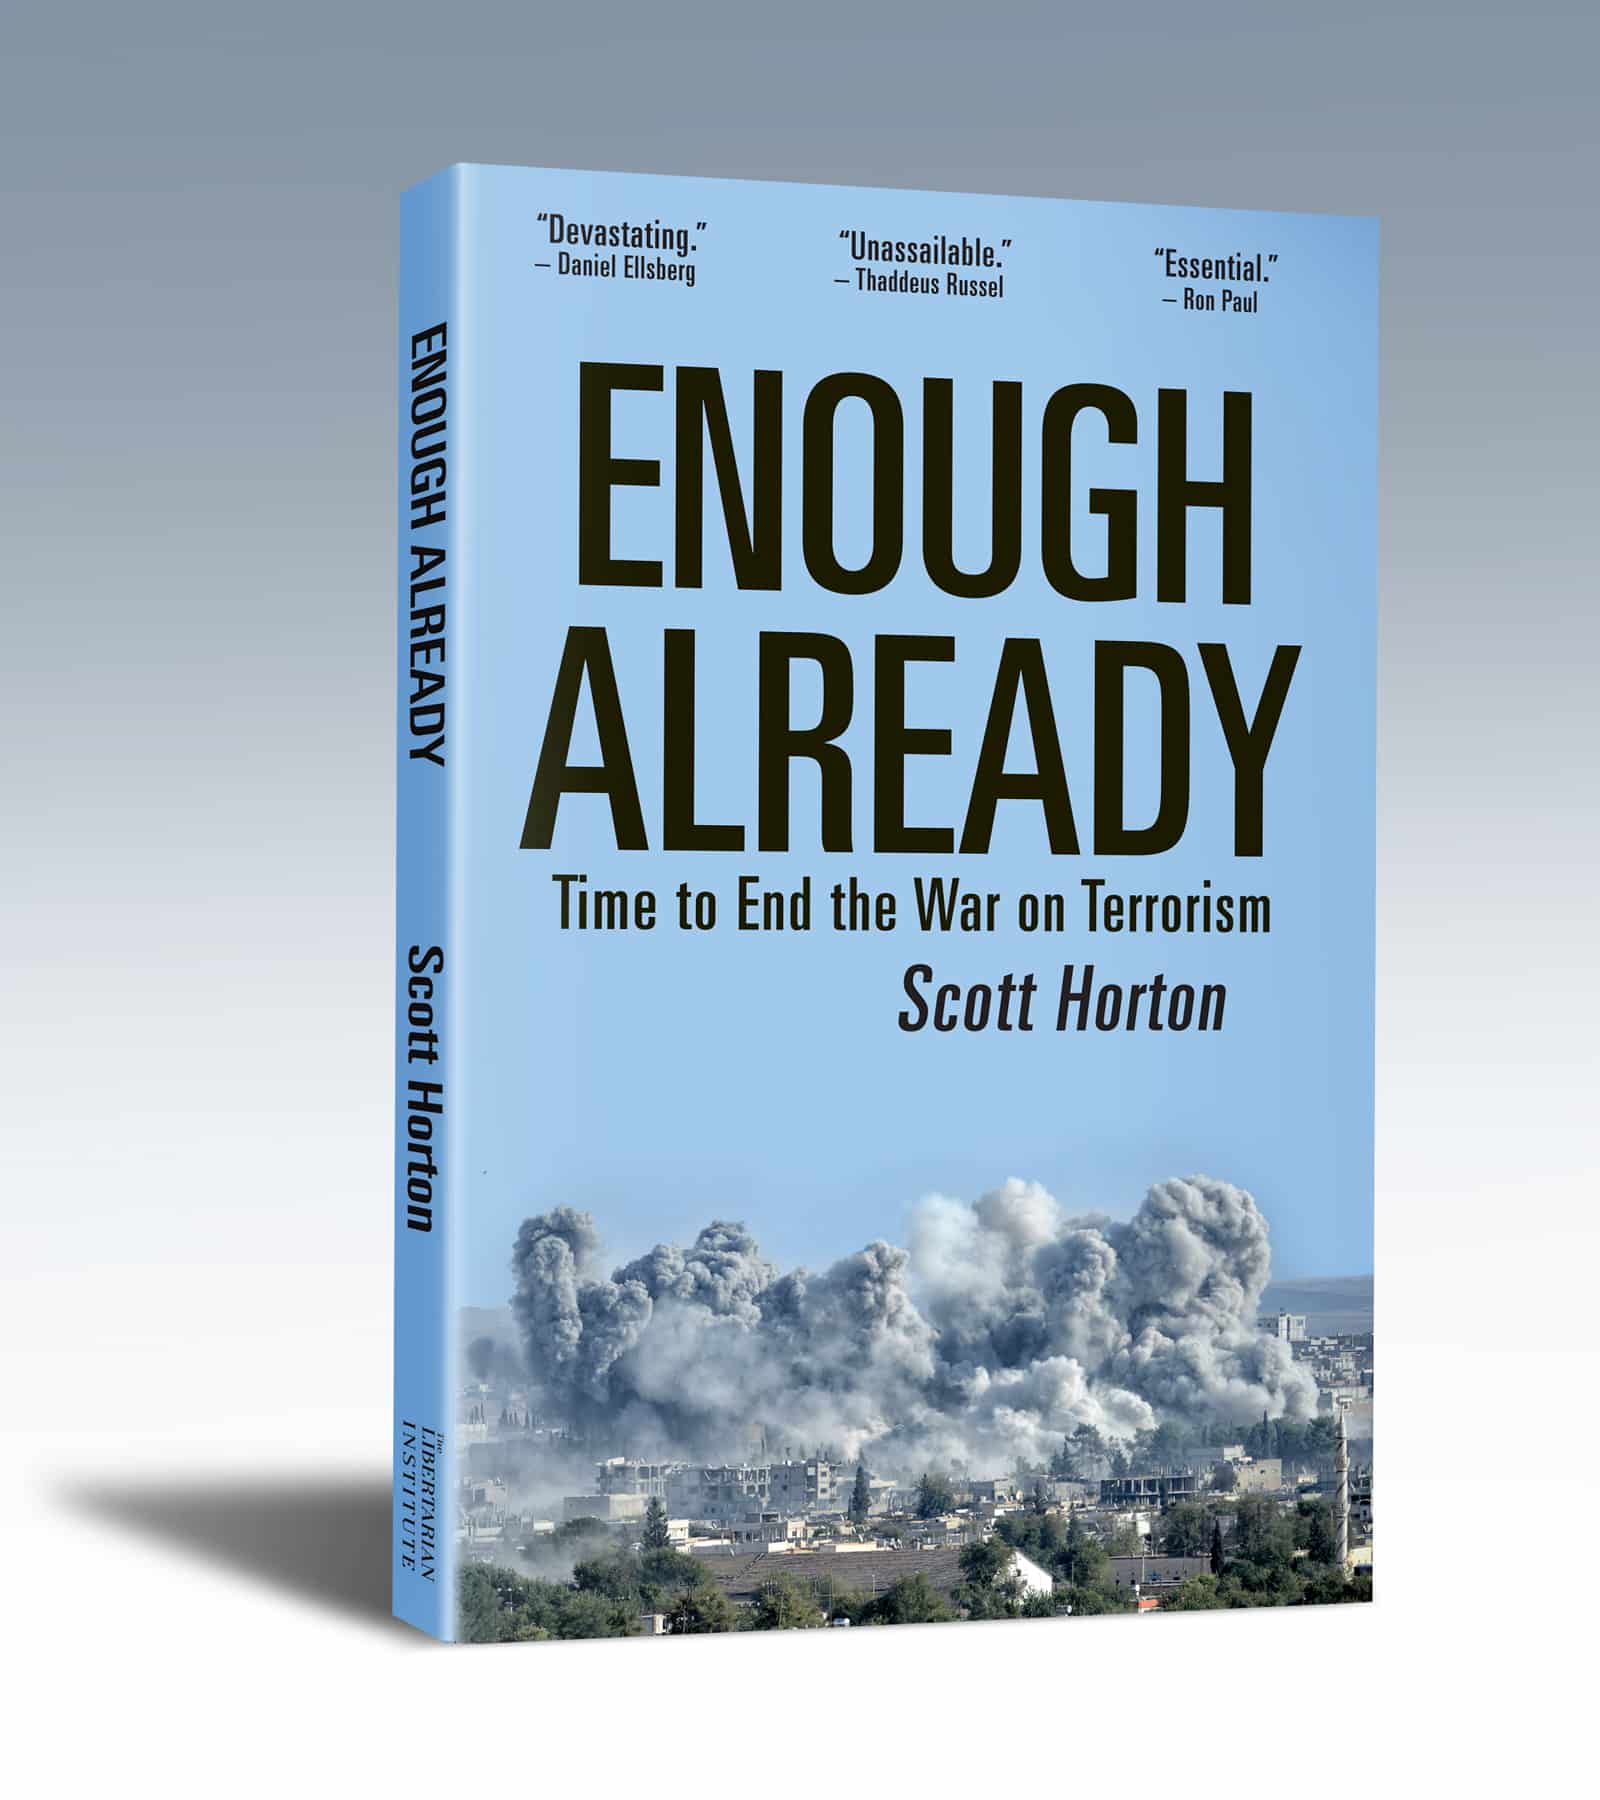 The American Conservative Reviews Scott Horton’s Newest Book